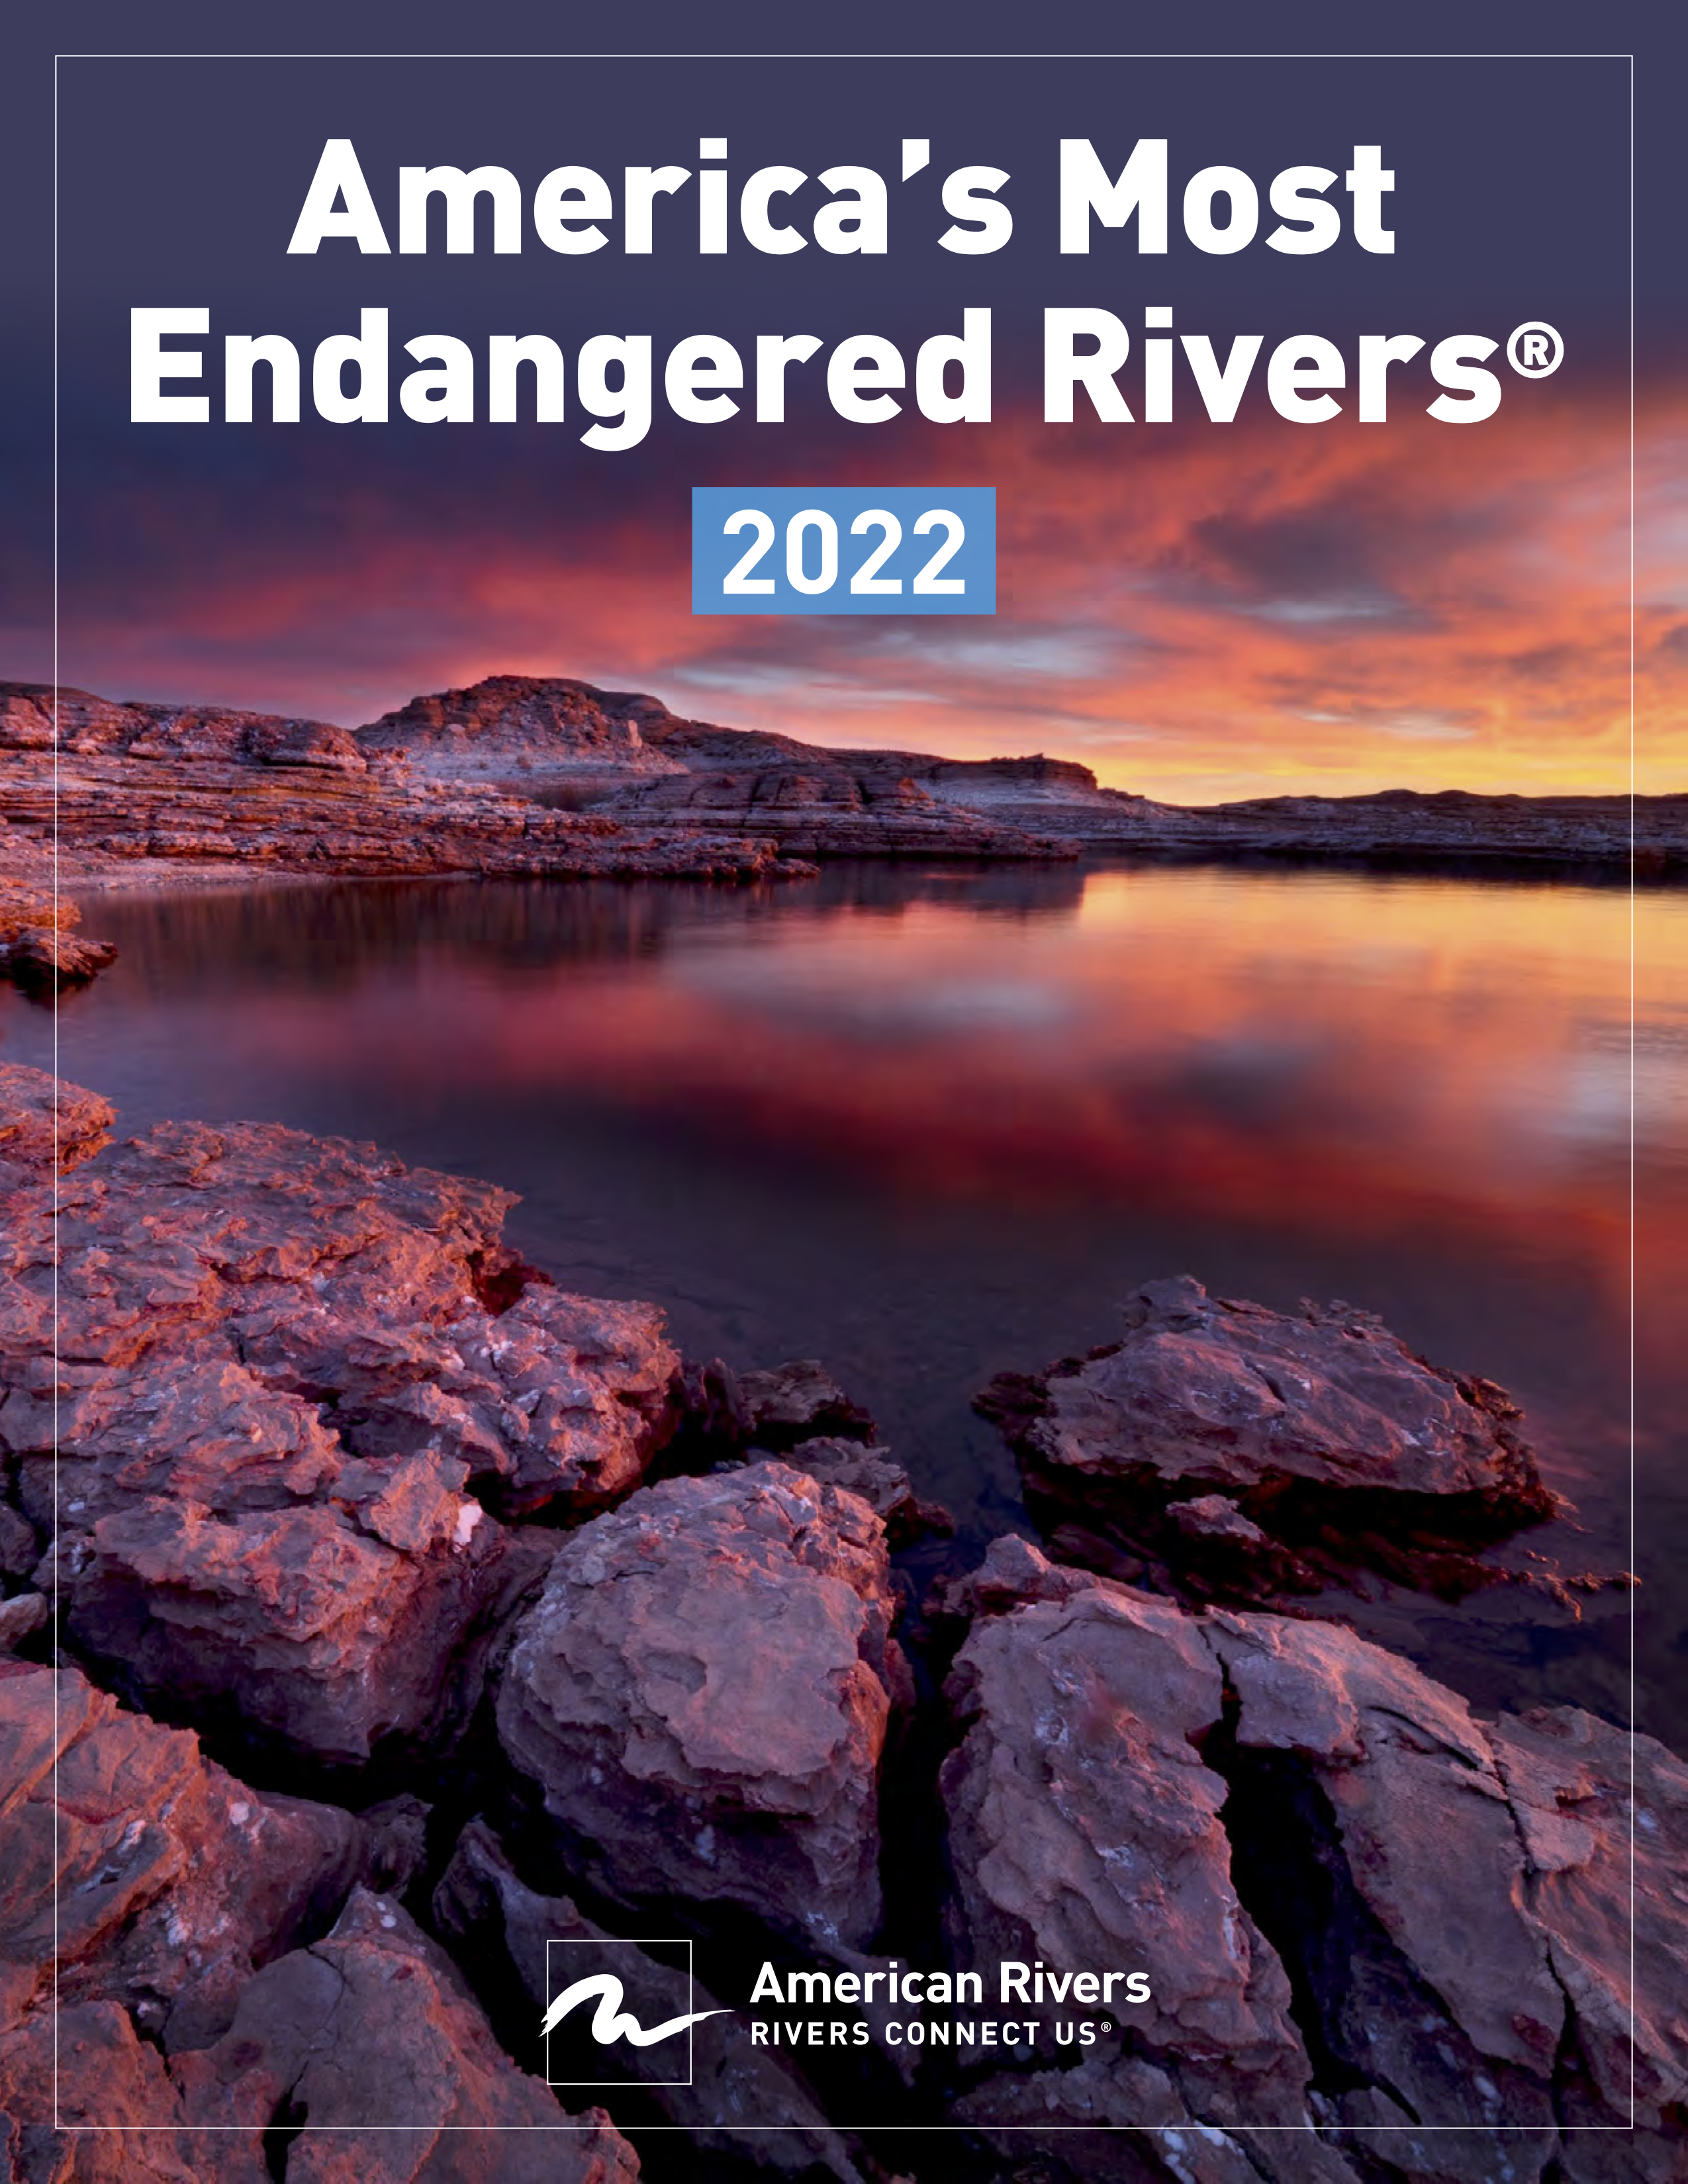 America's Most Endangered Rivers